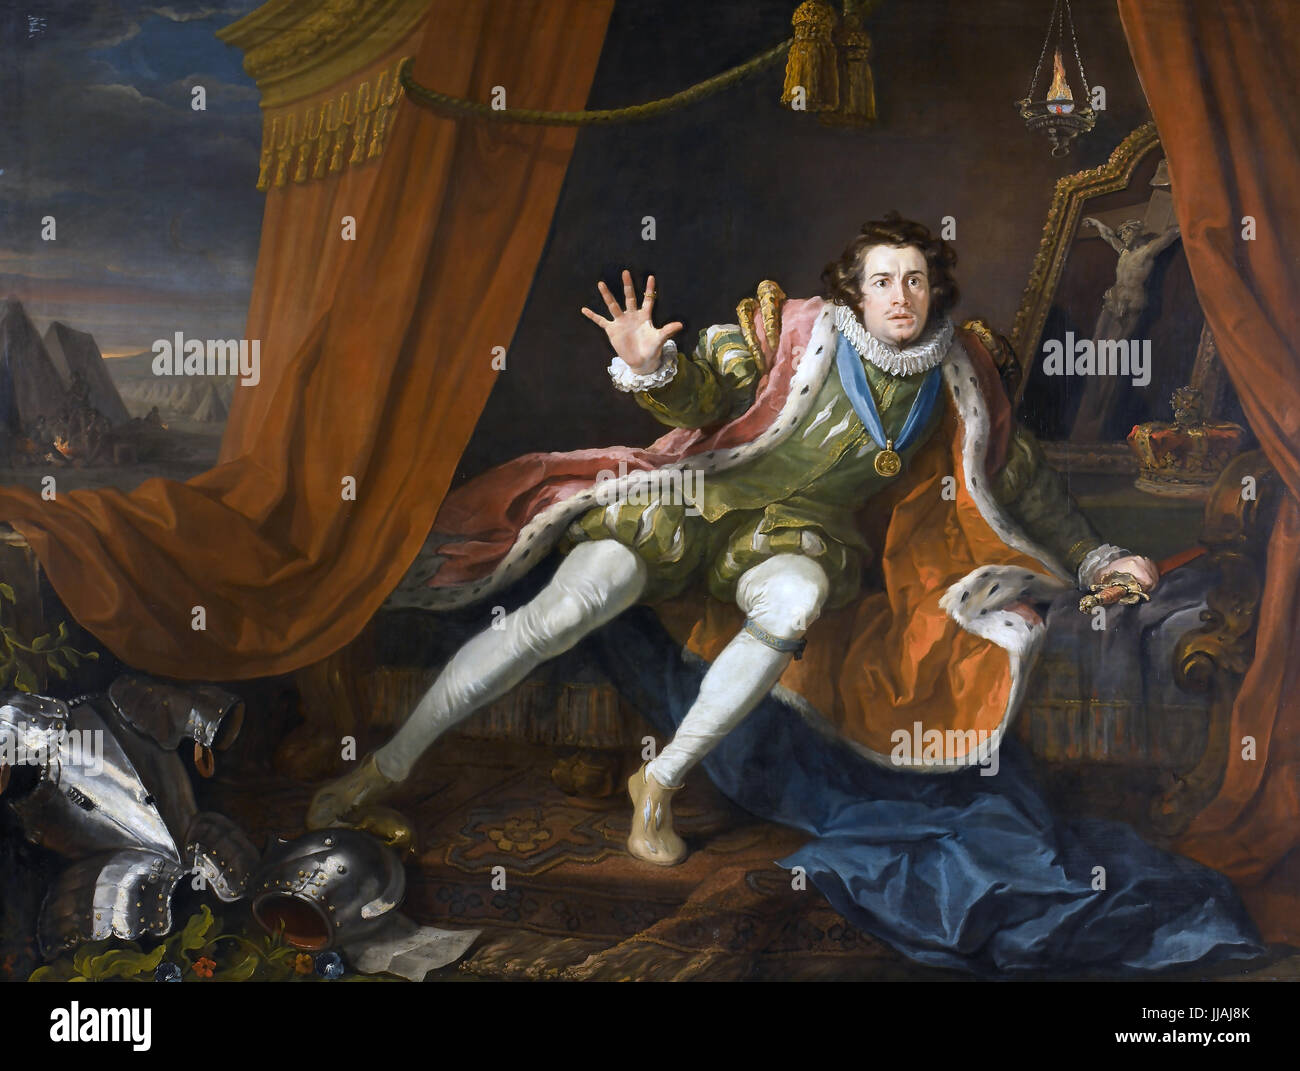 DAVID GARRICK (1717-1779) English actor as Richard III waking before Battle of Bosworth in a 1745 painting by William Hogarth Stock Photo